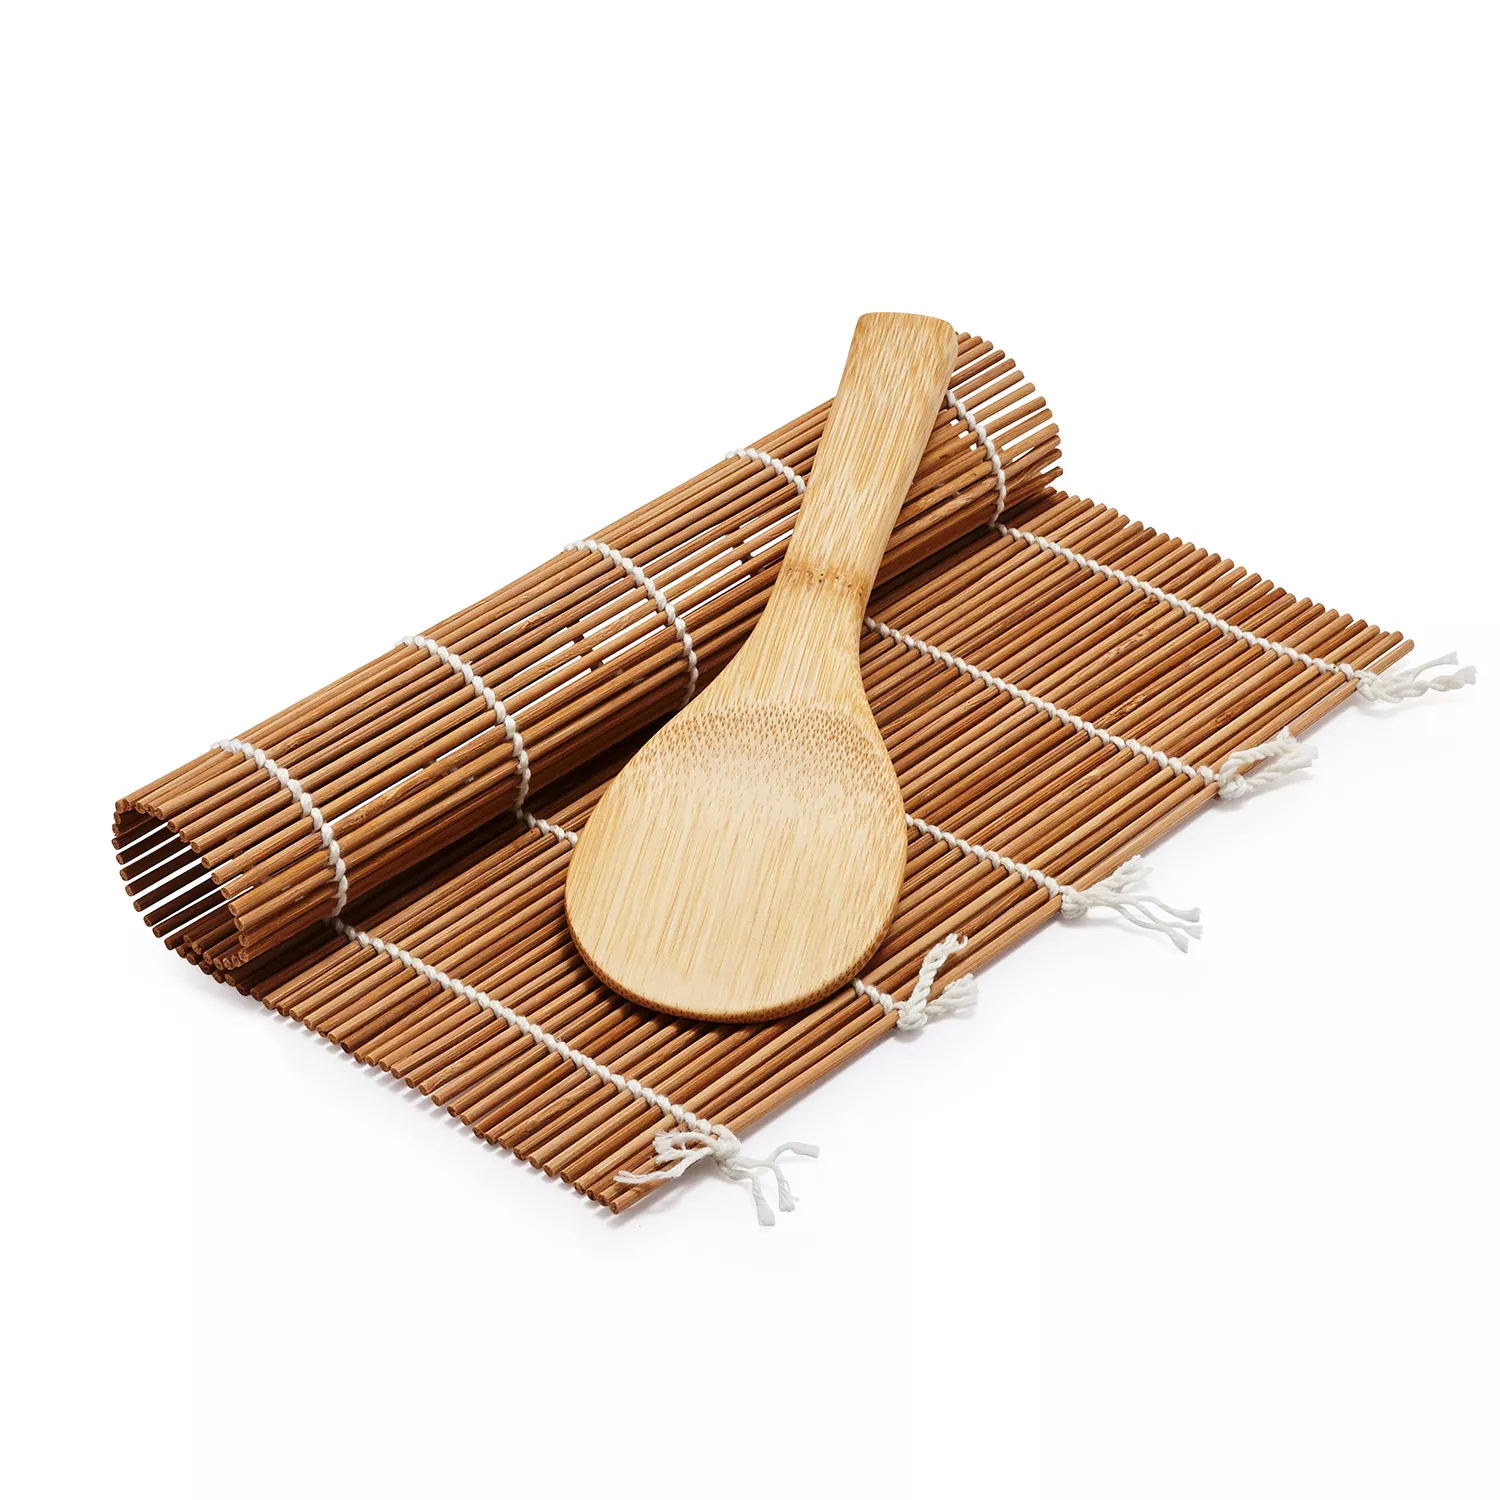 6 Carbonized Bamboo Sushi Rolling Mats with Rice Paddle